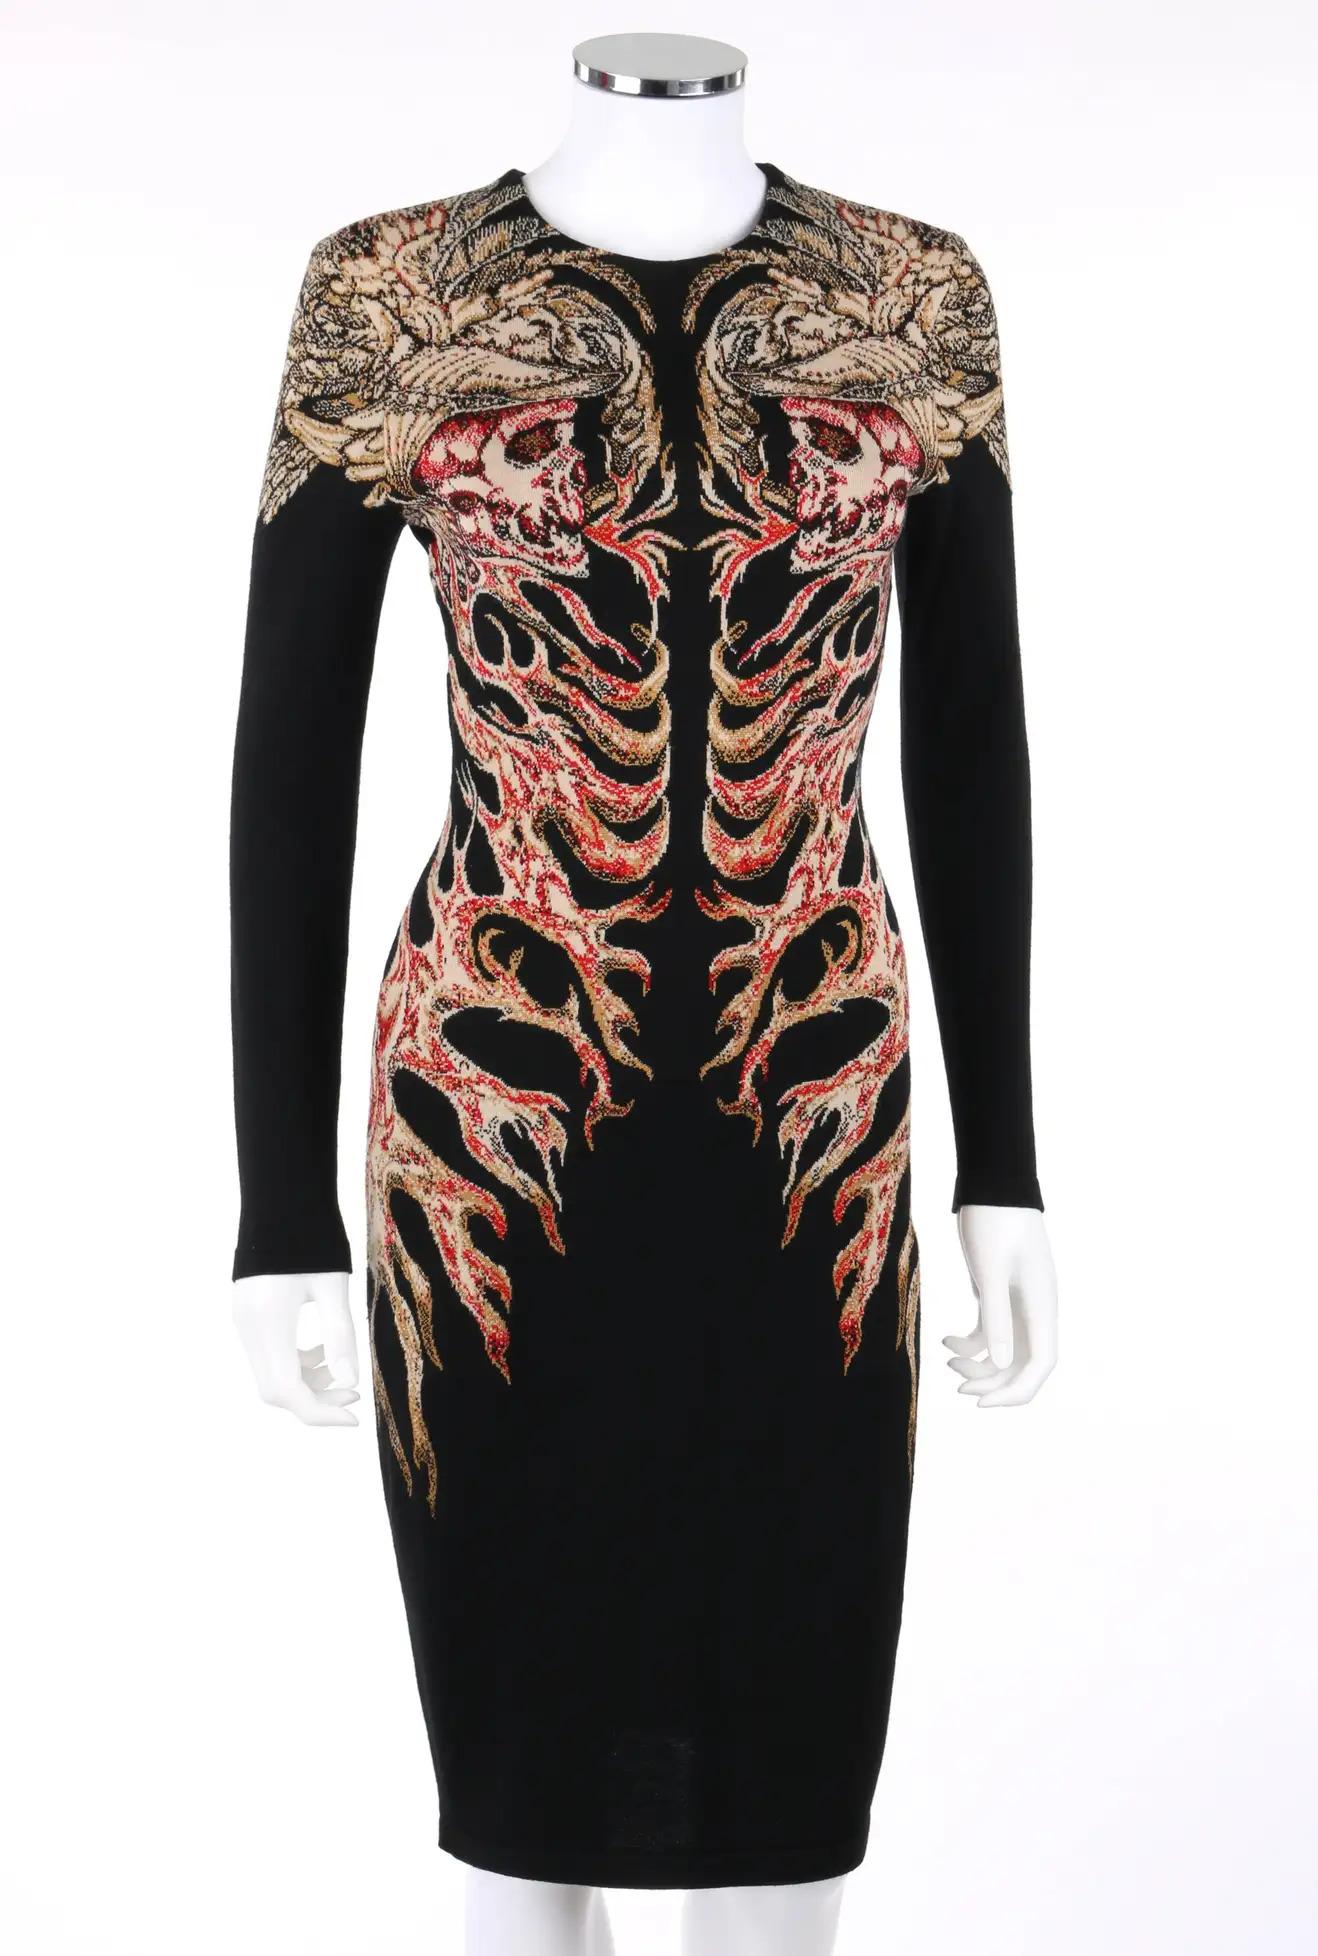 Alexander McQueen, F/W 2010 
Knit dress.
Wool and silk blend.

Multi-color angel wing skulls and flame pattern wraps around to back from center front. 
Long sleeves. 
Scoop neckline. 
Sheath pull on style. 
Measurements:
Shoulder: 15